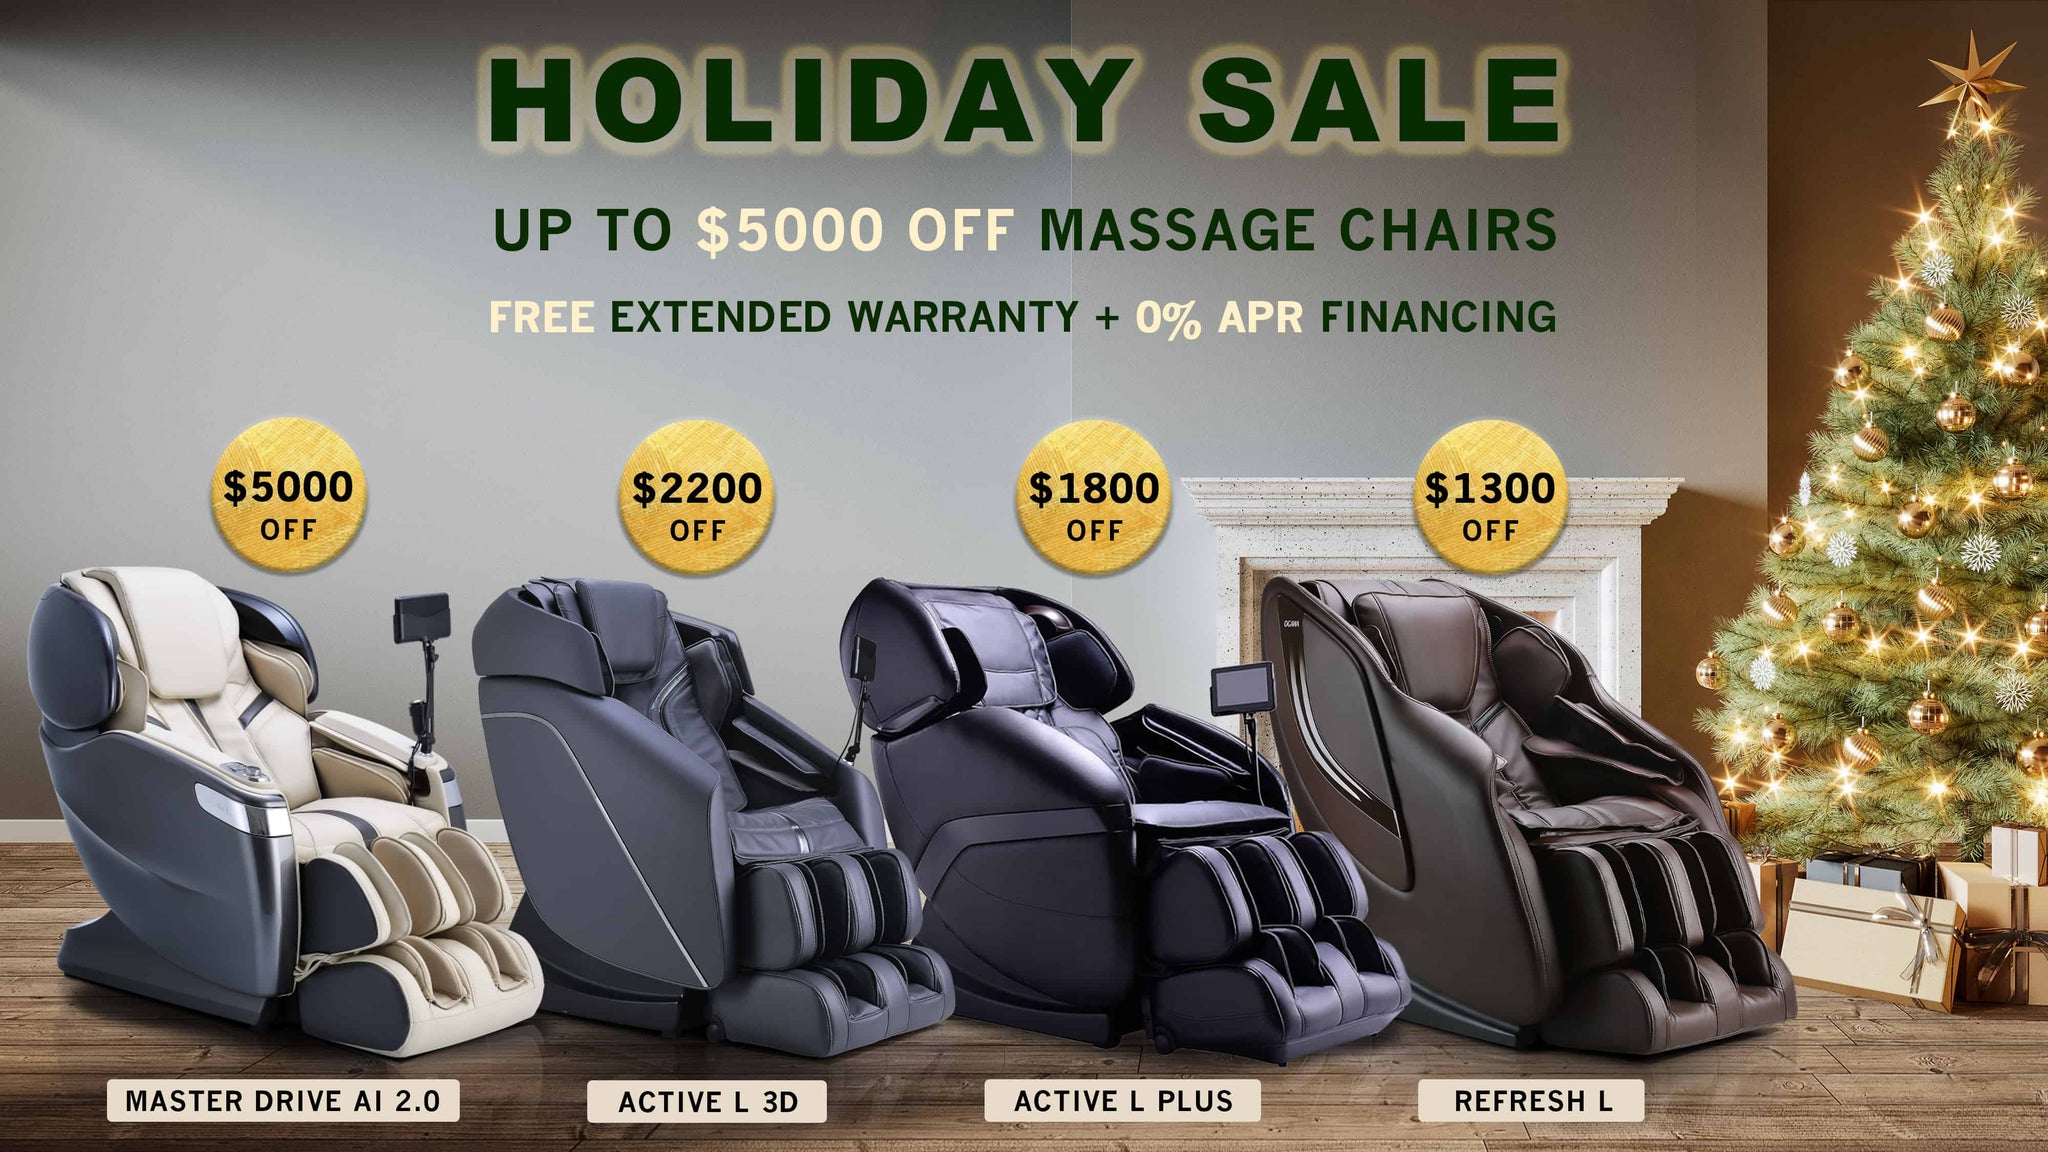 Holiday Sale - Up to $5000 Off on Ogawa Massage Chairs Plus a Free Extended Warranty